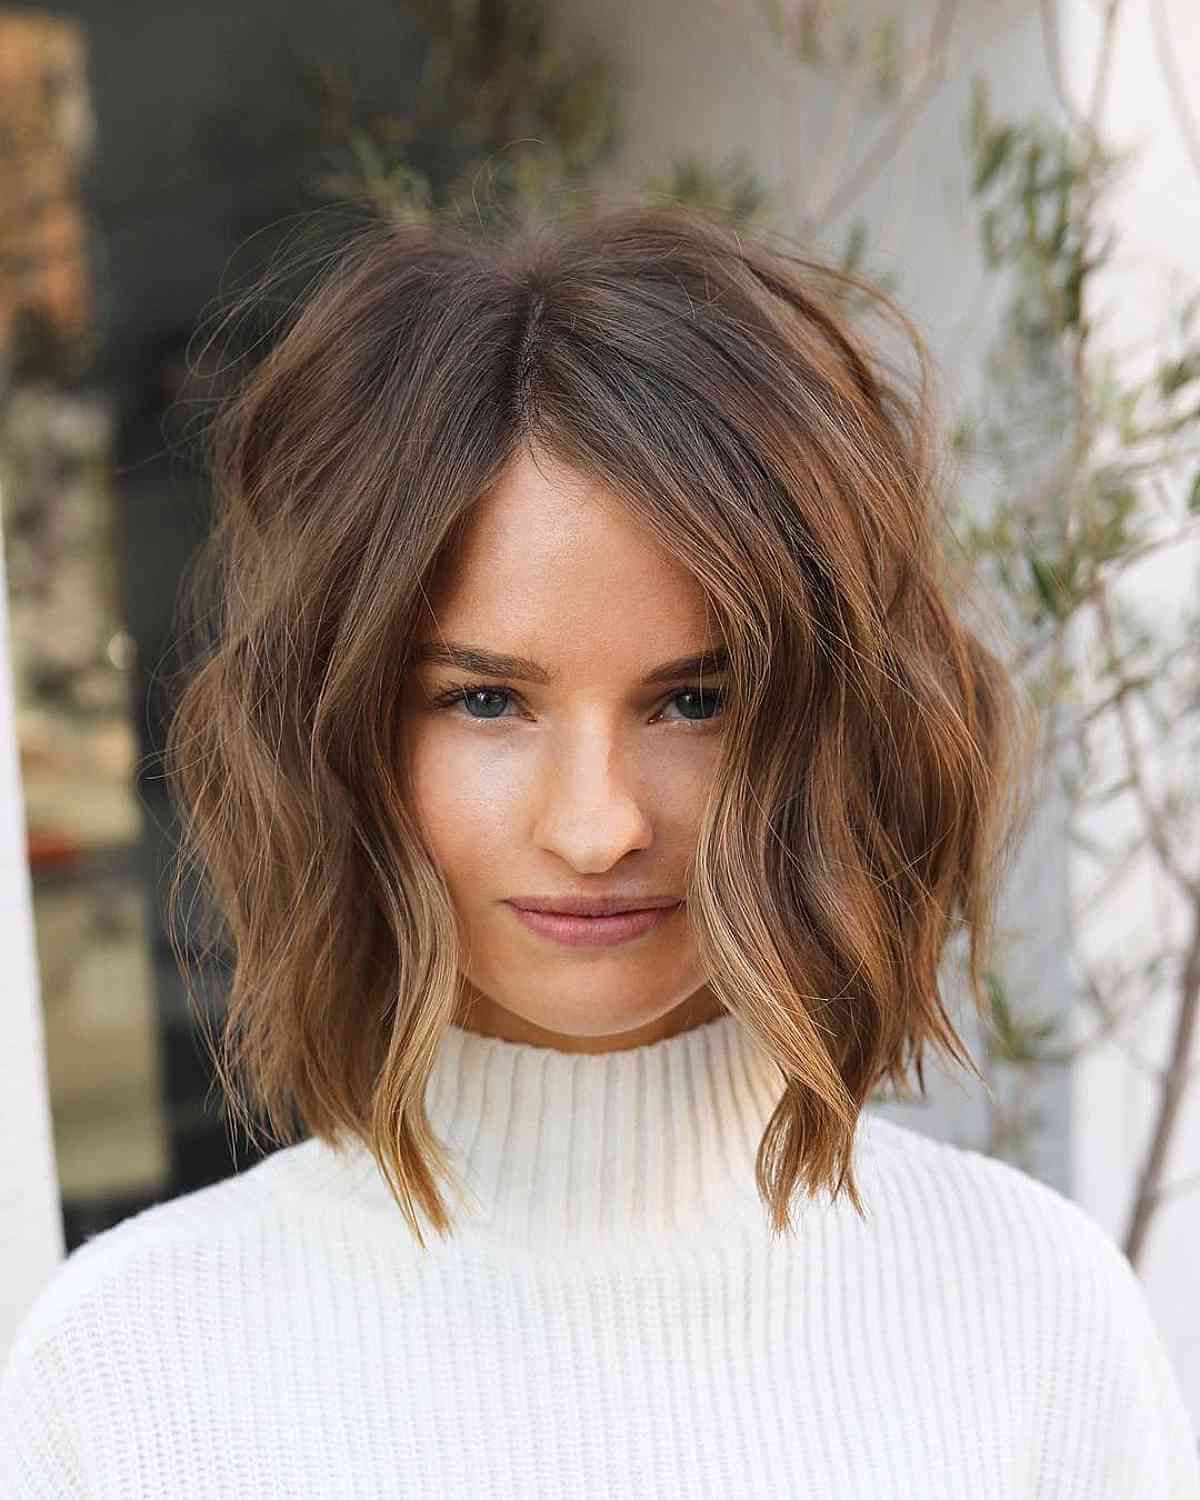 44 Most Requested Choppy Haircuts For A Subtly Edgy Style Regarding Textured Haircut (View 22 of 25)